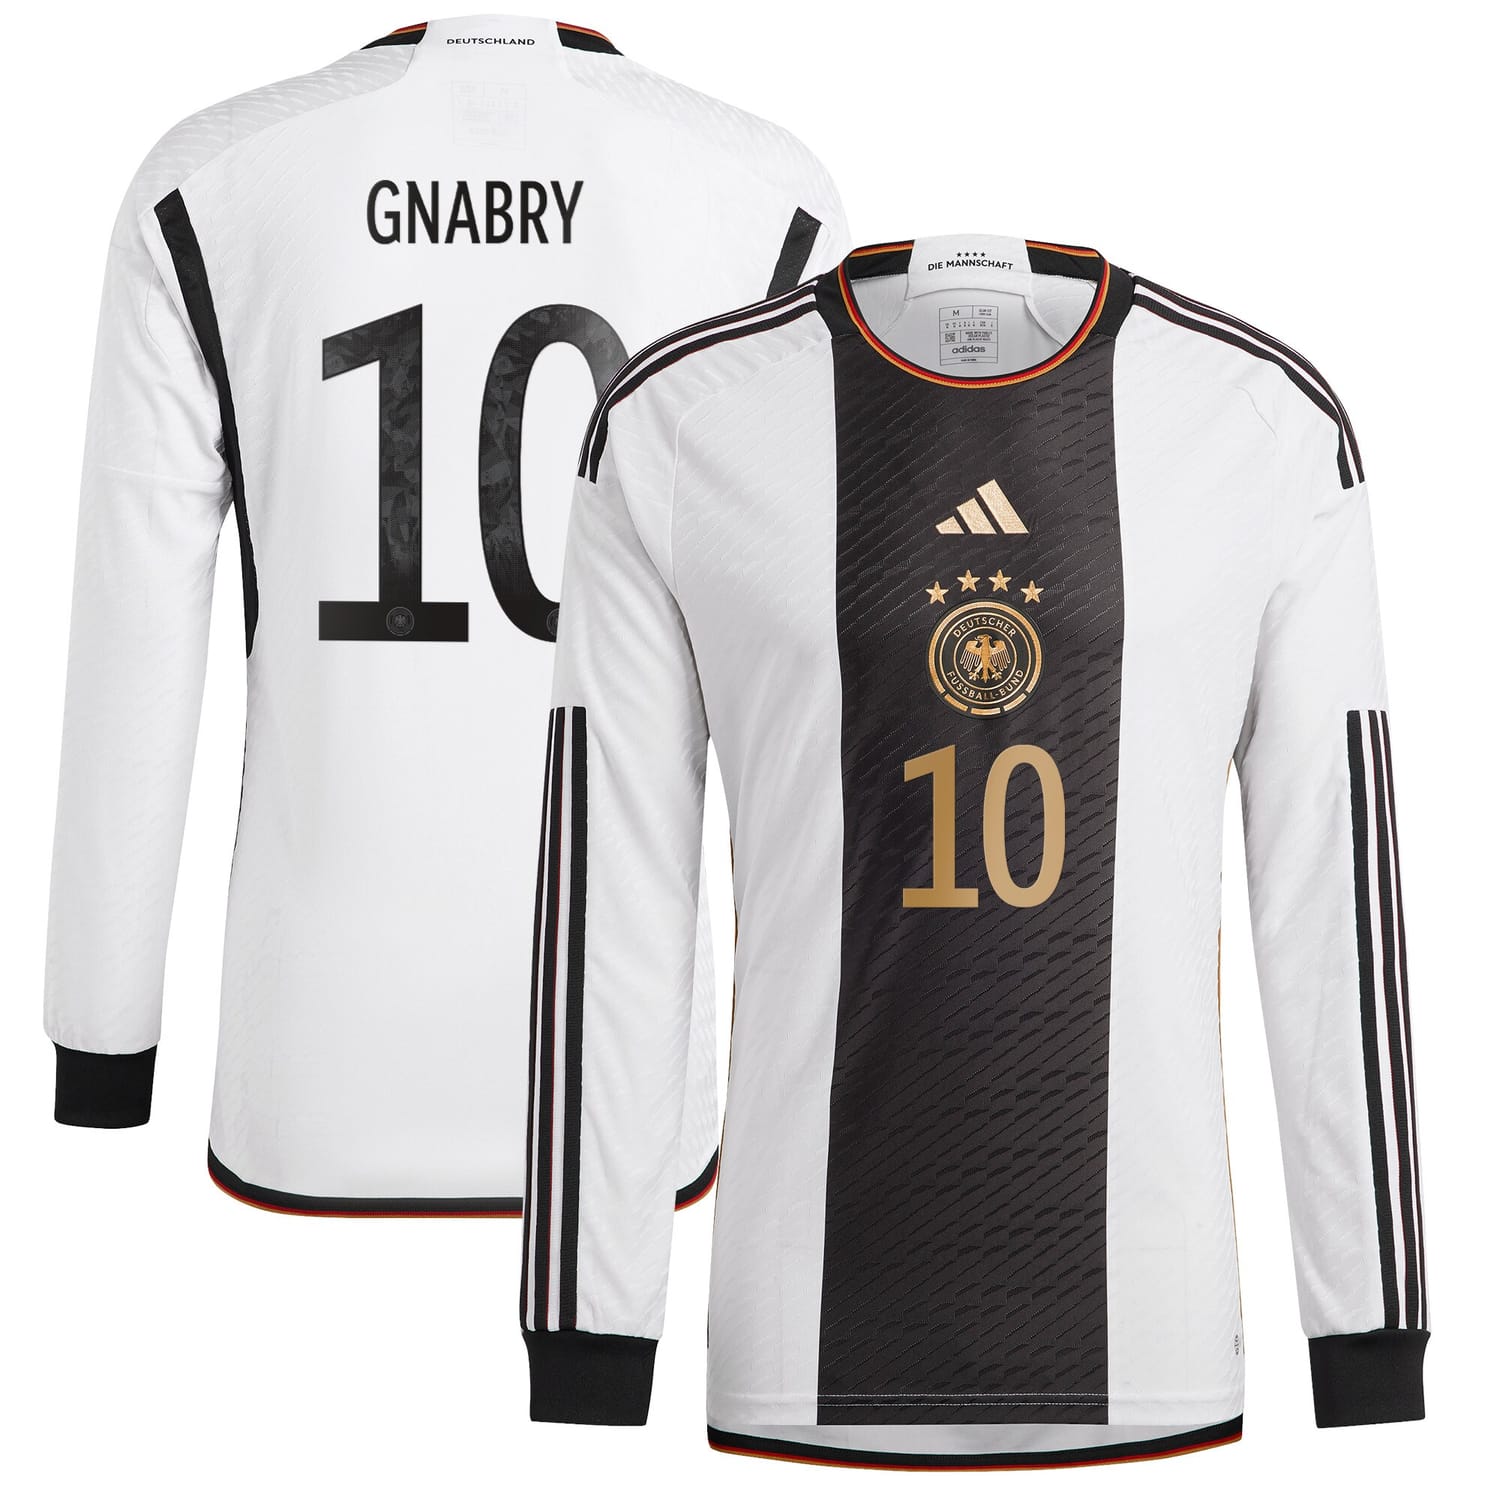 Germany National Team Home Authentic Jersey Shirt Long Sleeve player Serge Gnabry 10 printing for Men